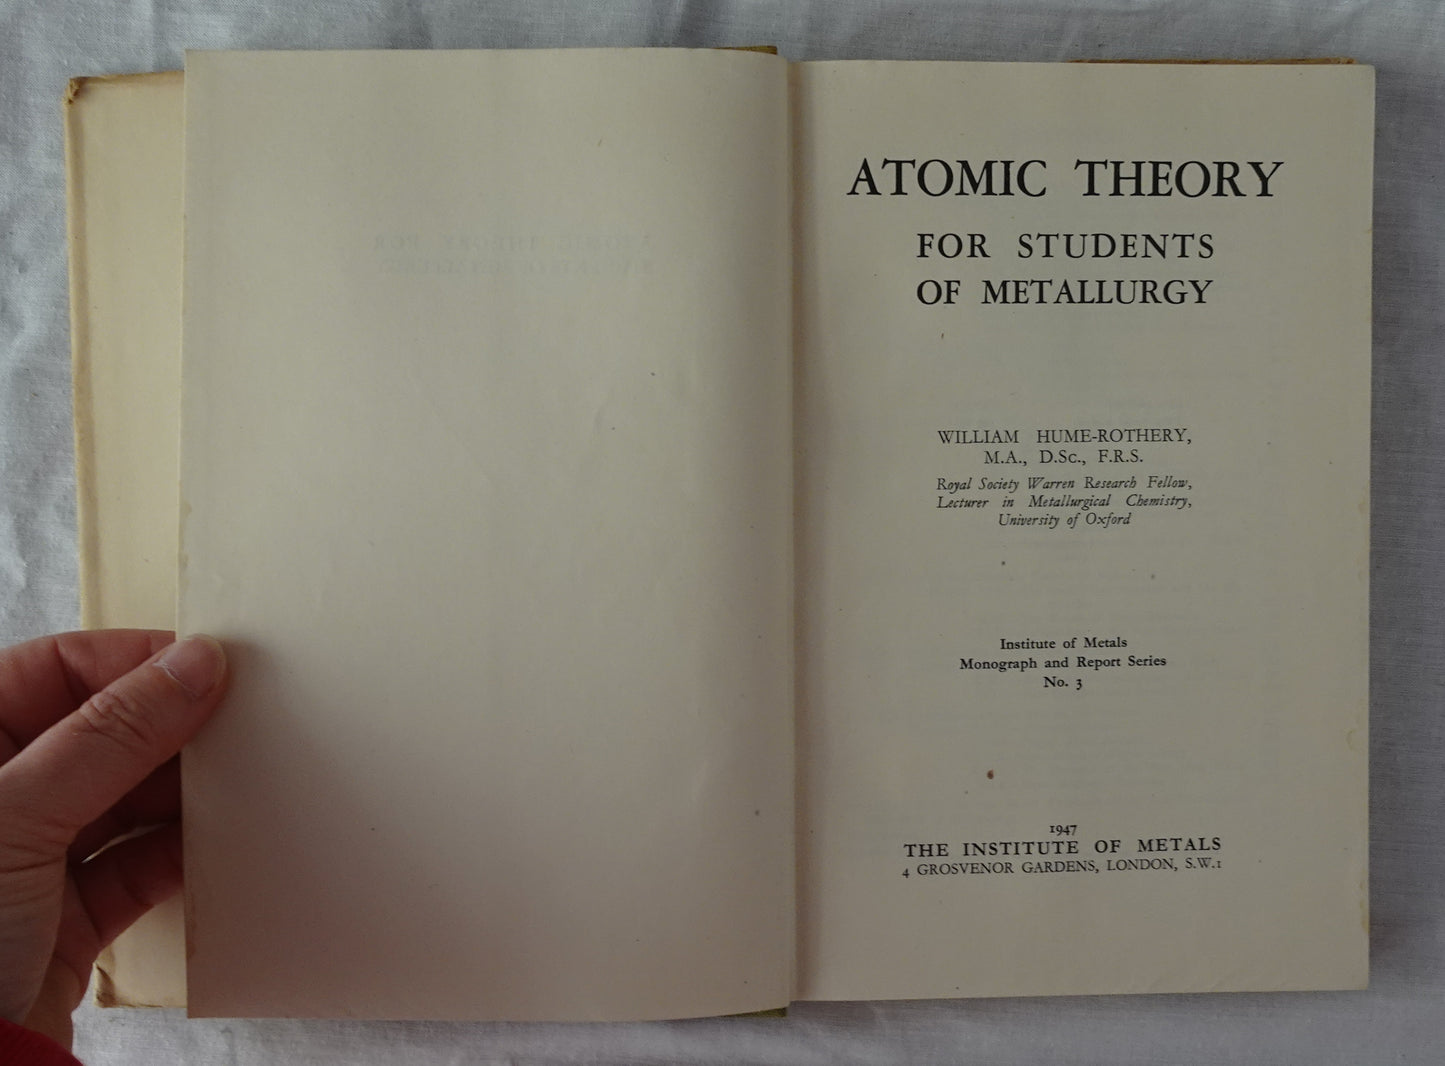 Atomic Theory for Students of Metallurgy by William Hume-Rothery